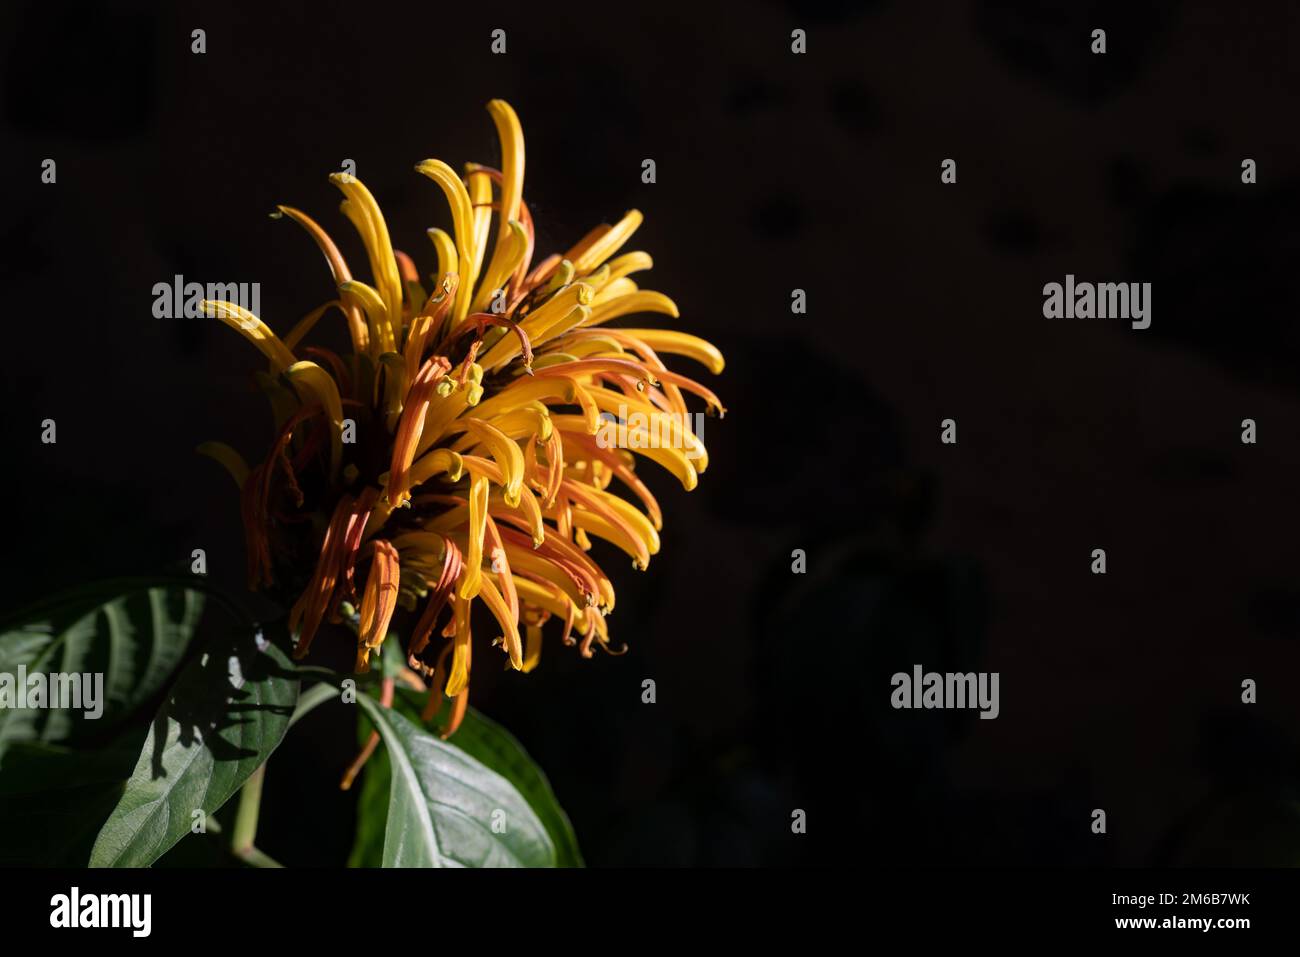 Justicia aurea yellow flower on dark background. Yellow or Golden Plume blossom Stock Photo